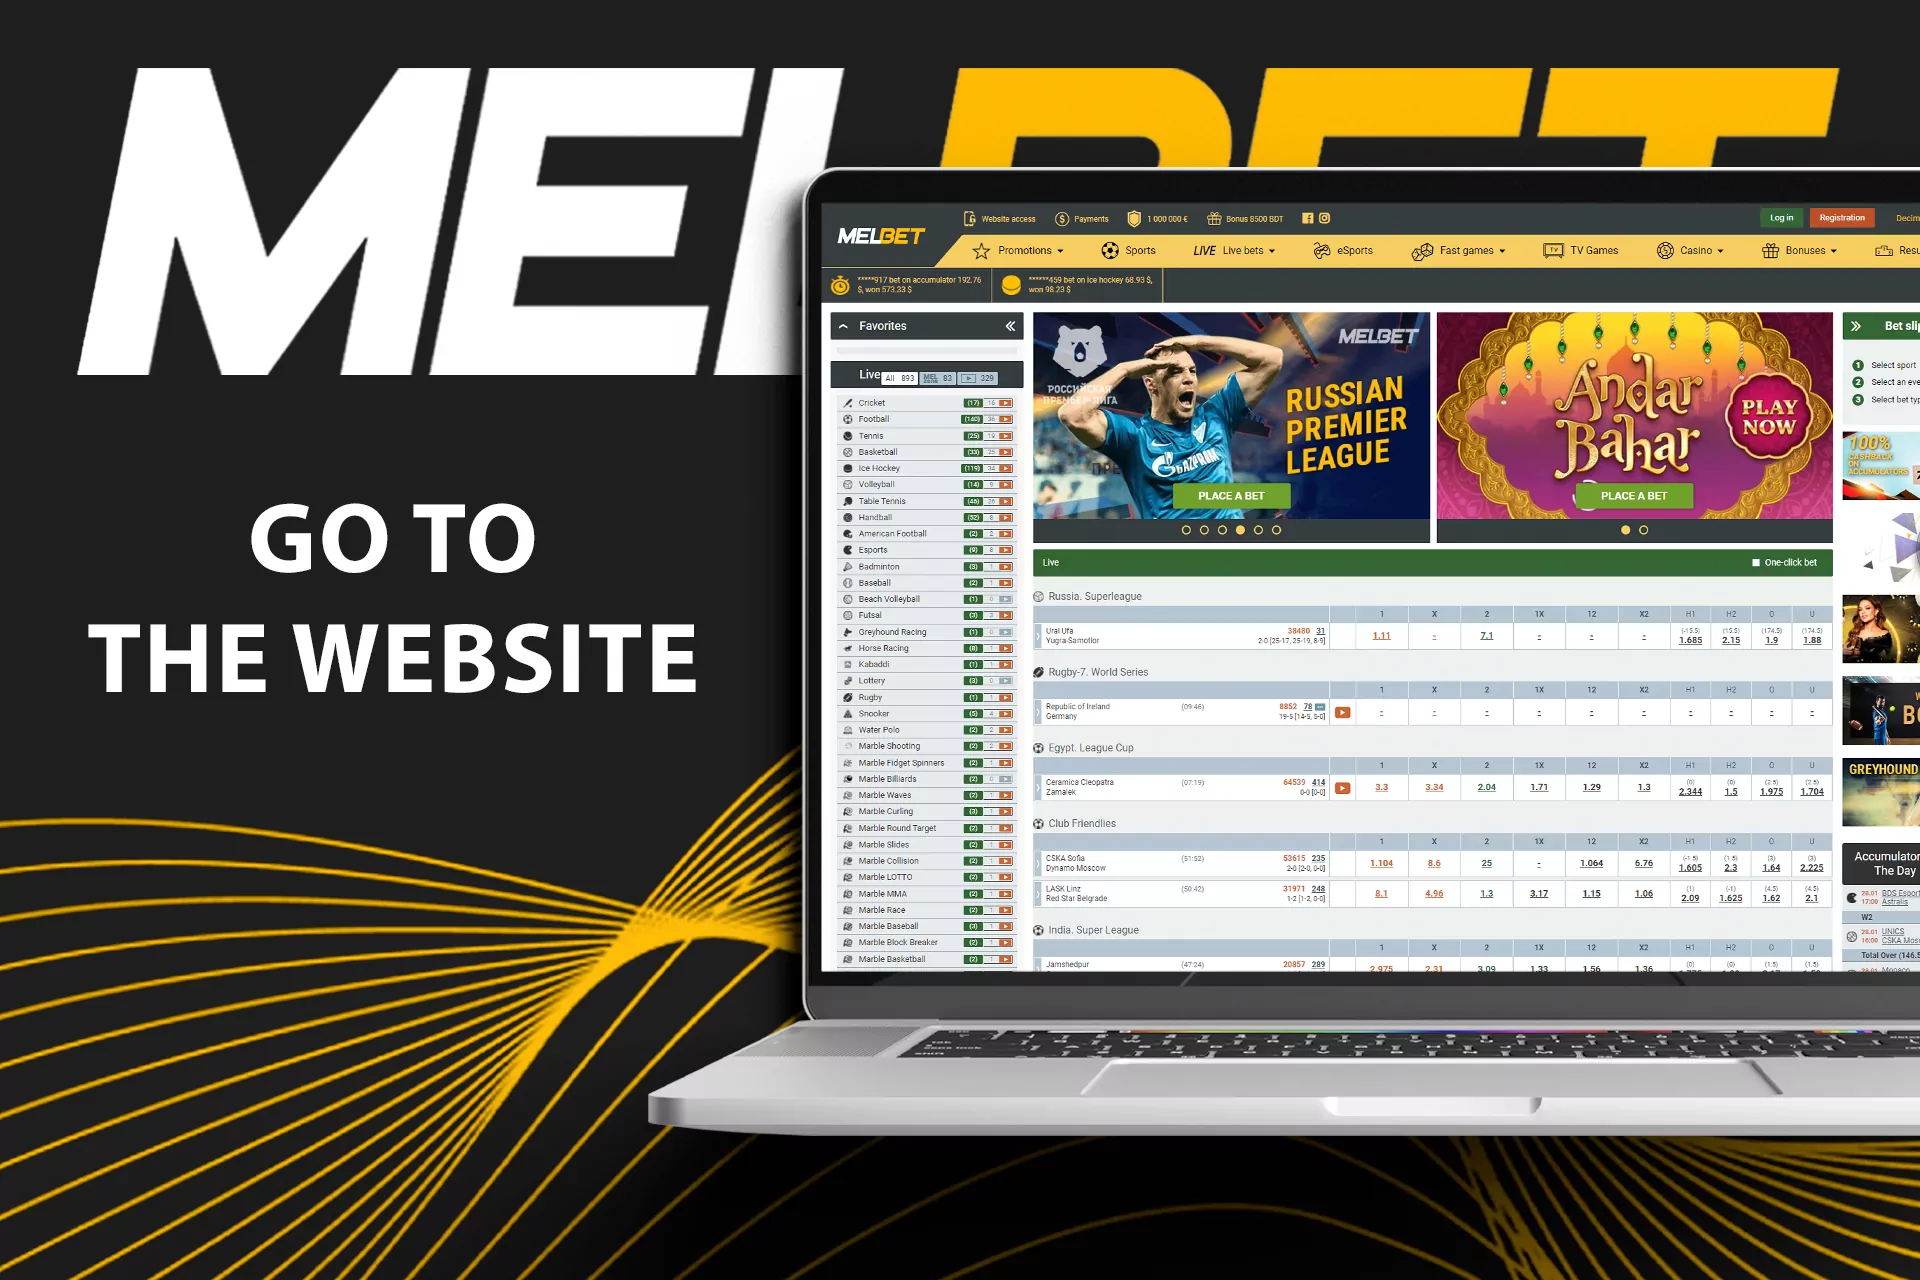 Go to the official website of Melbet in a browser.